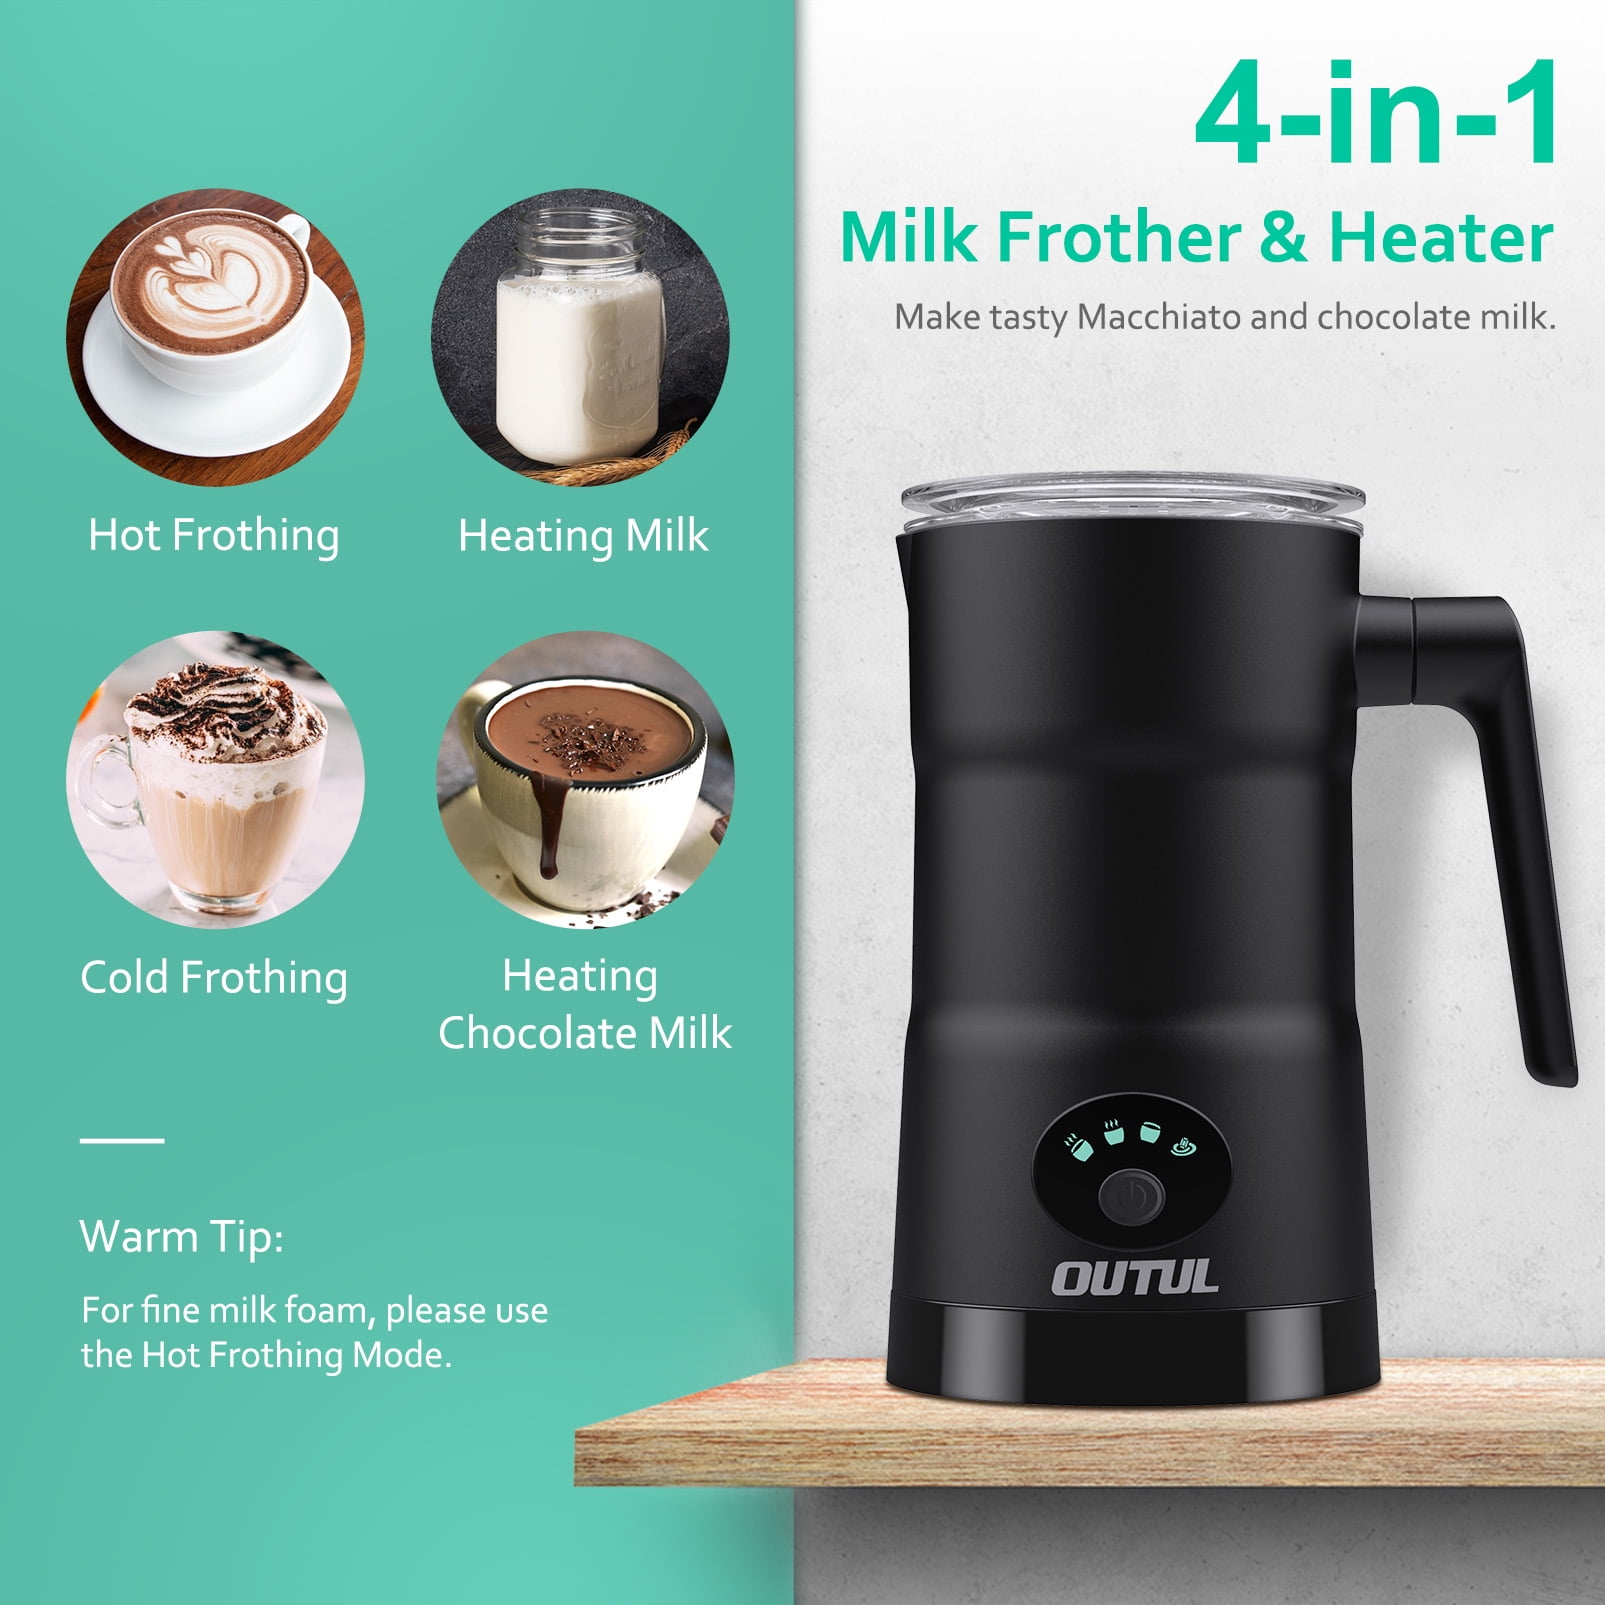 Matt Blue Newoer Electric Milk Frother and Warmer,4 in 1 Automatic Milk Frothers 400W Automatic Milk Foam Maker with Hot /& Cold Milk Functionality for Latte Coffee Hot Chocolates Cappuccino